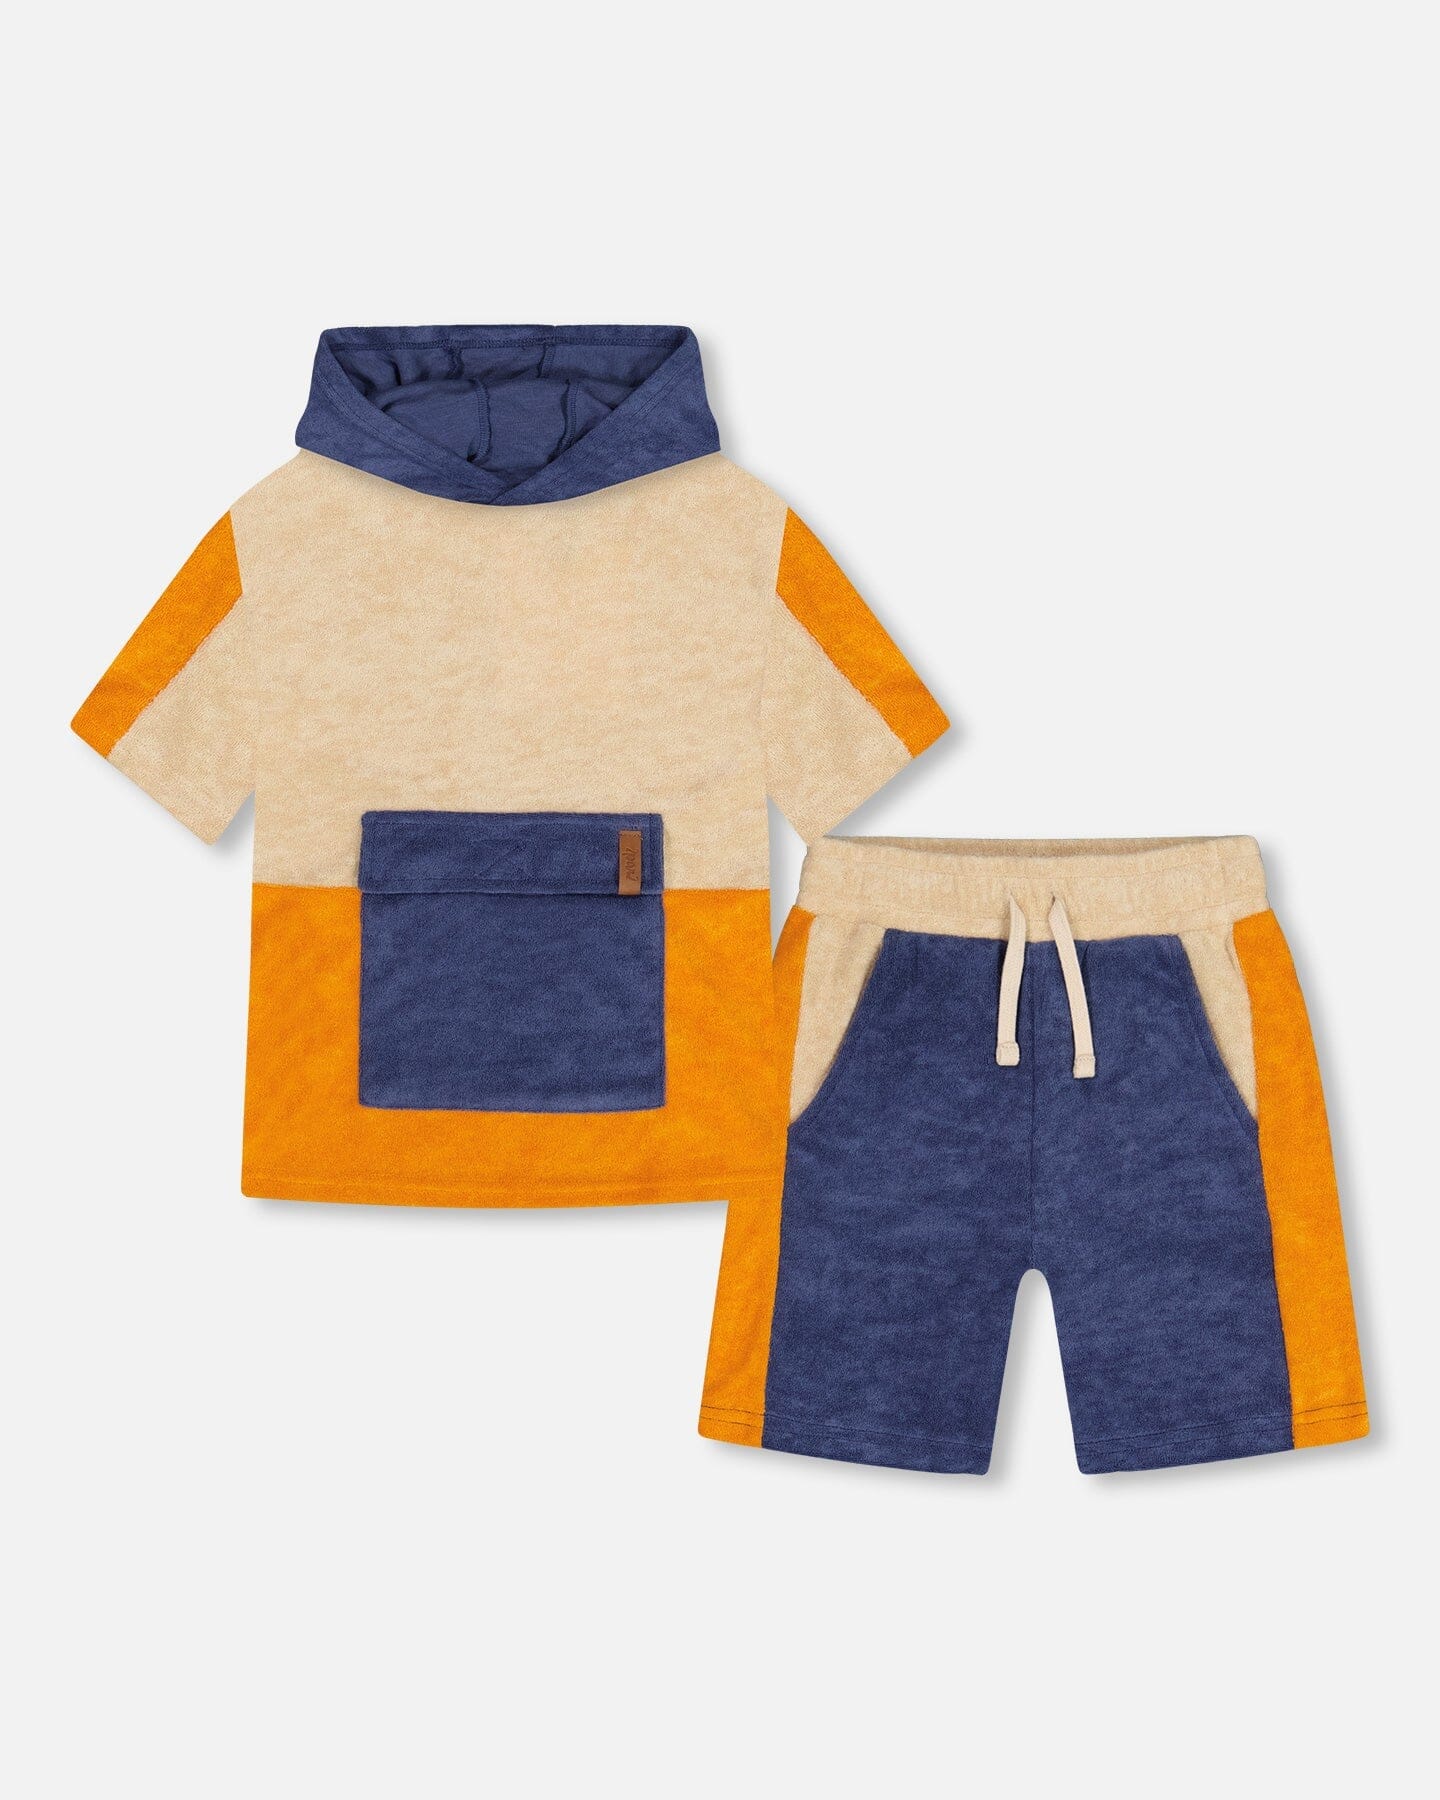 Terry Cloth Hooded Top And Short Set Navy And Beige - F30U11_976